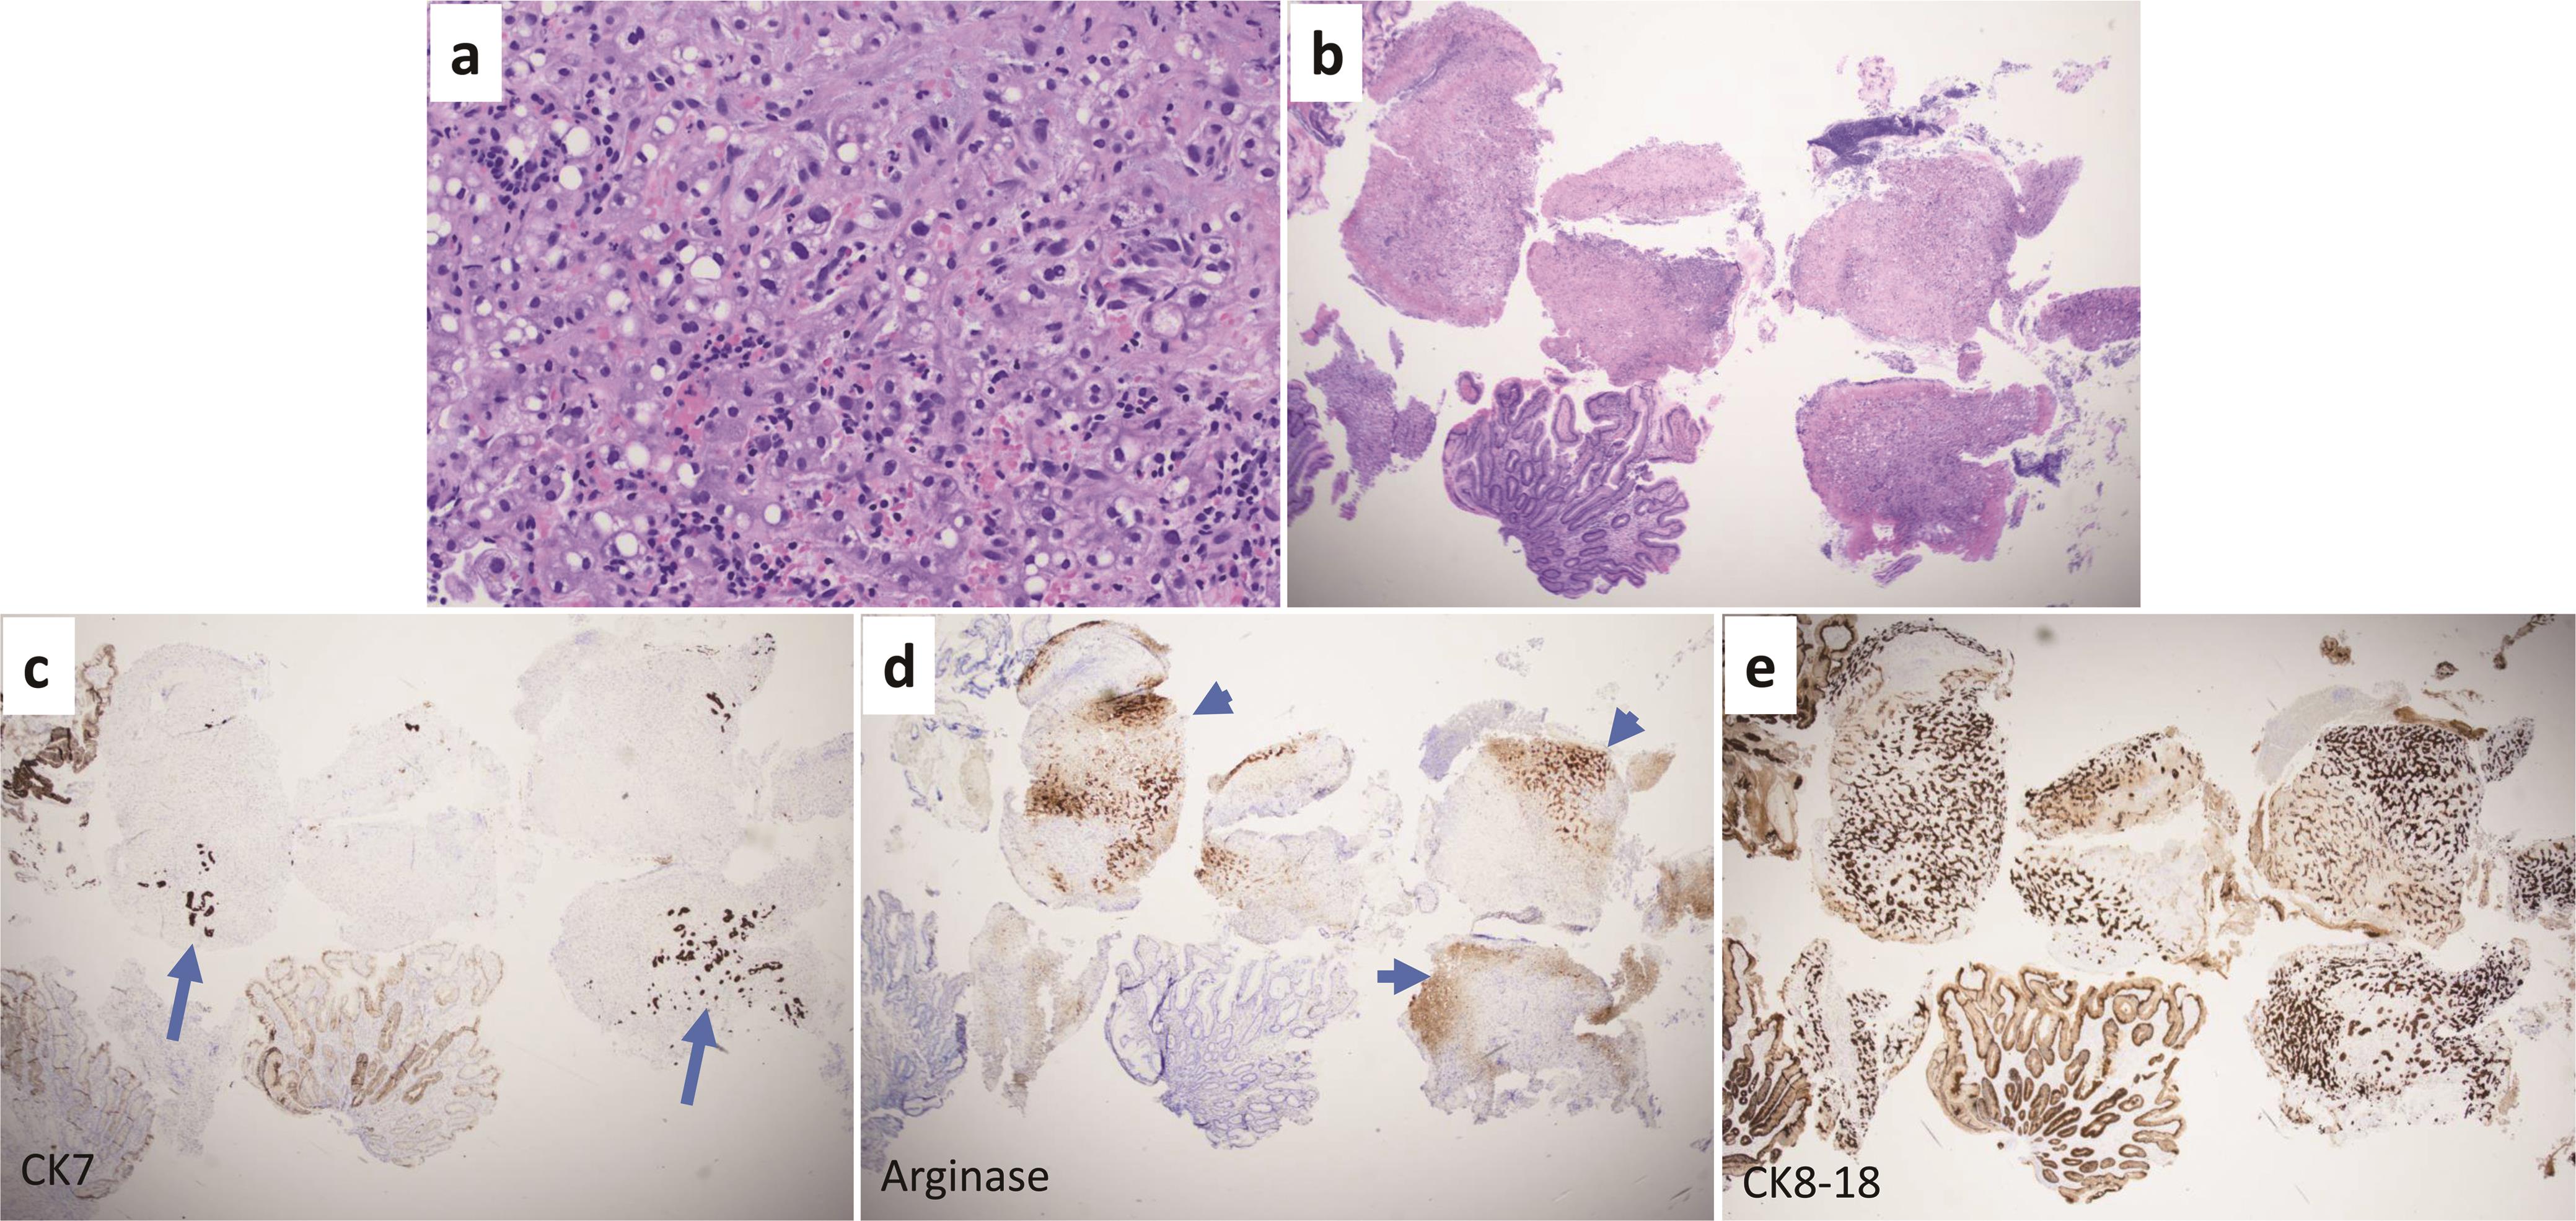 Representative images of biopsy samples from a duodenal ulcer penetration that involved the liver by Hematoxylin & Eosin staining: (a) 200 ×; (b) 40 ×; (c) immunohistochemistry of CK7; (d) arginase; and (e) and CK8/18.